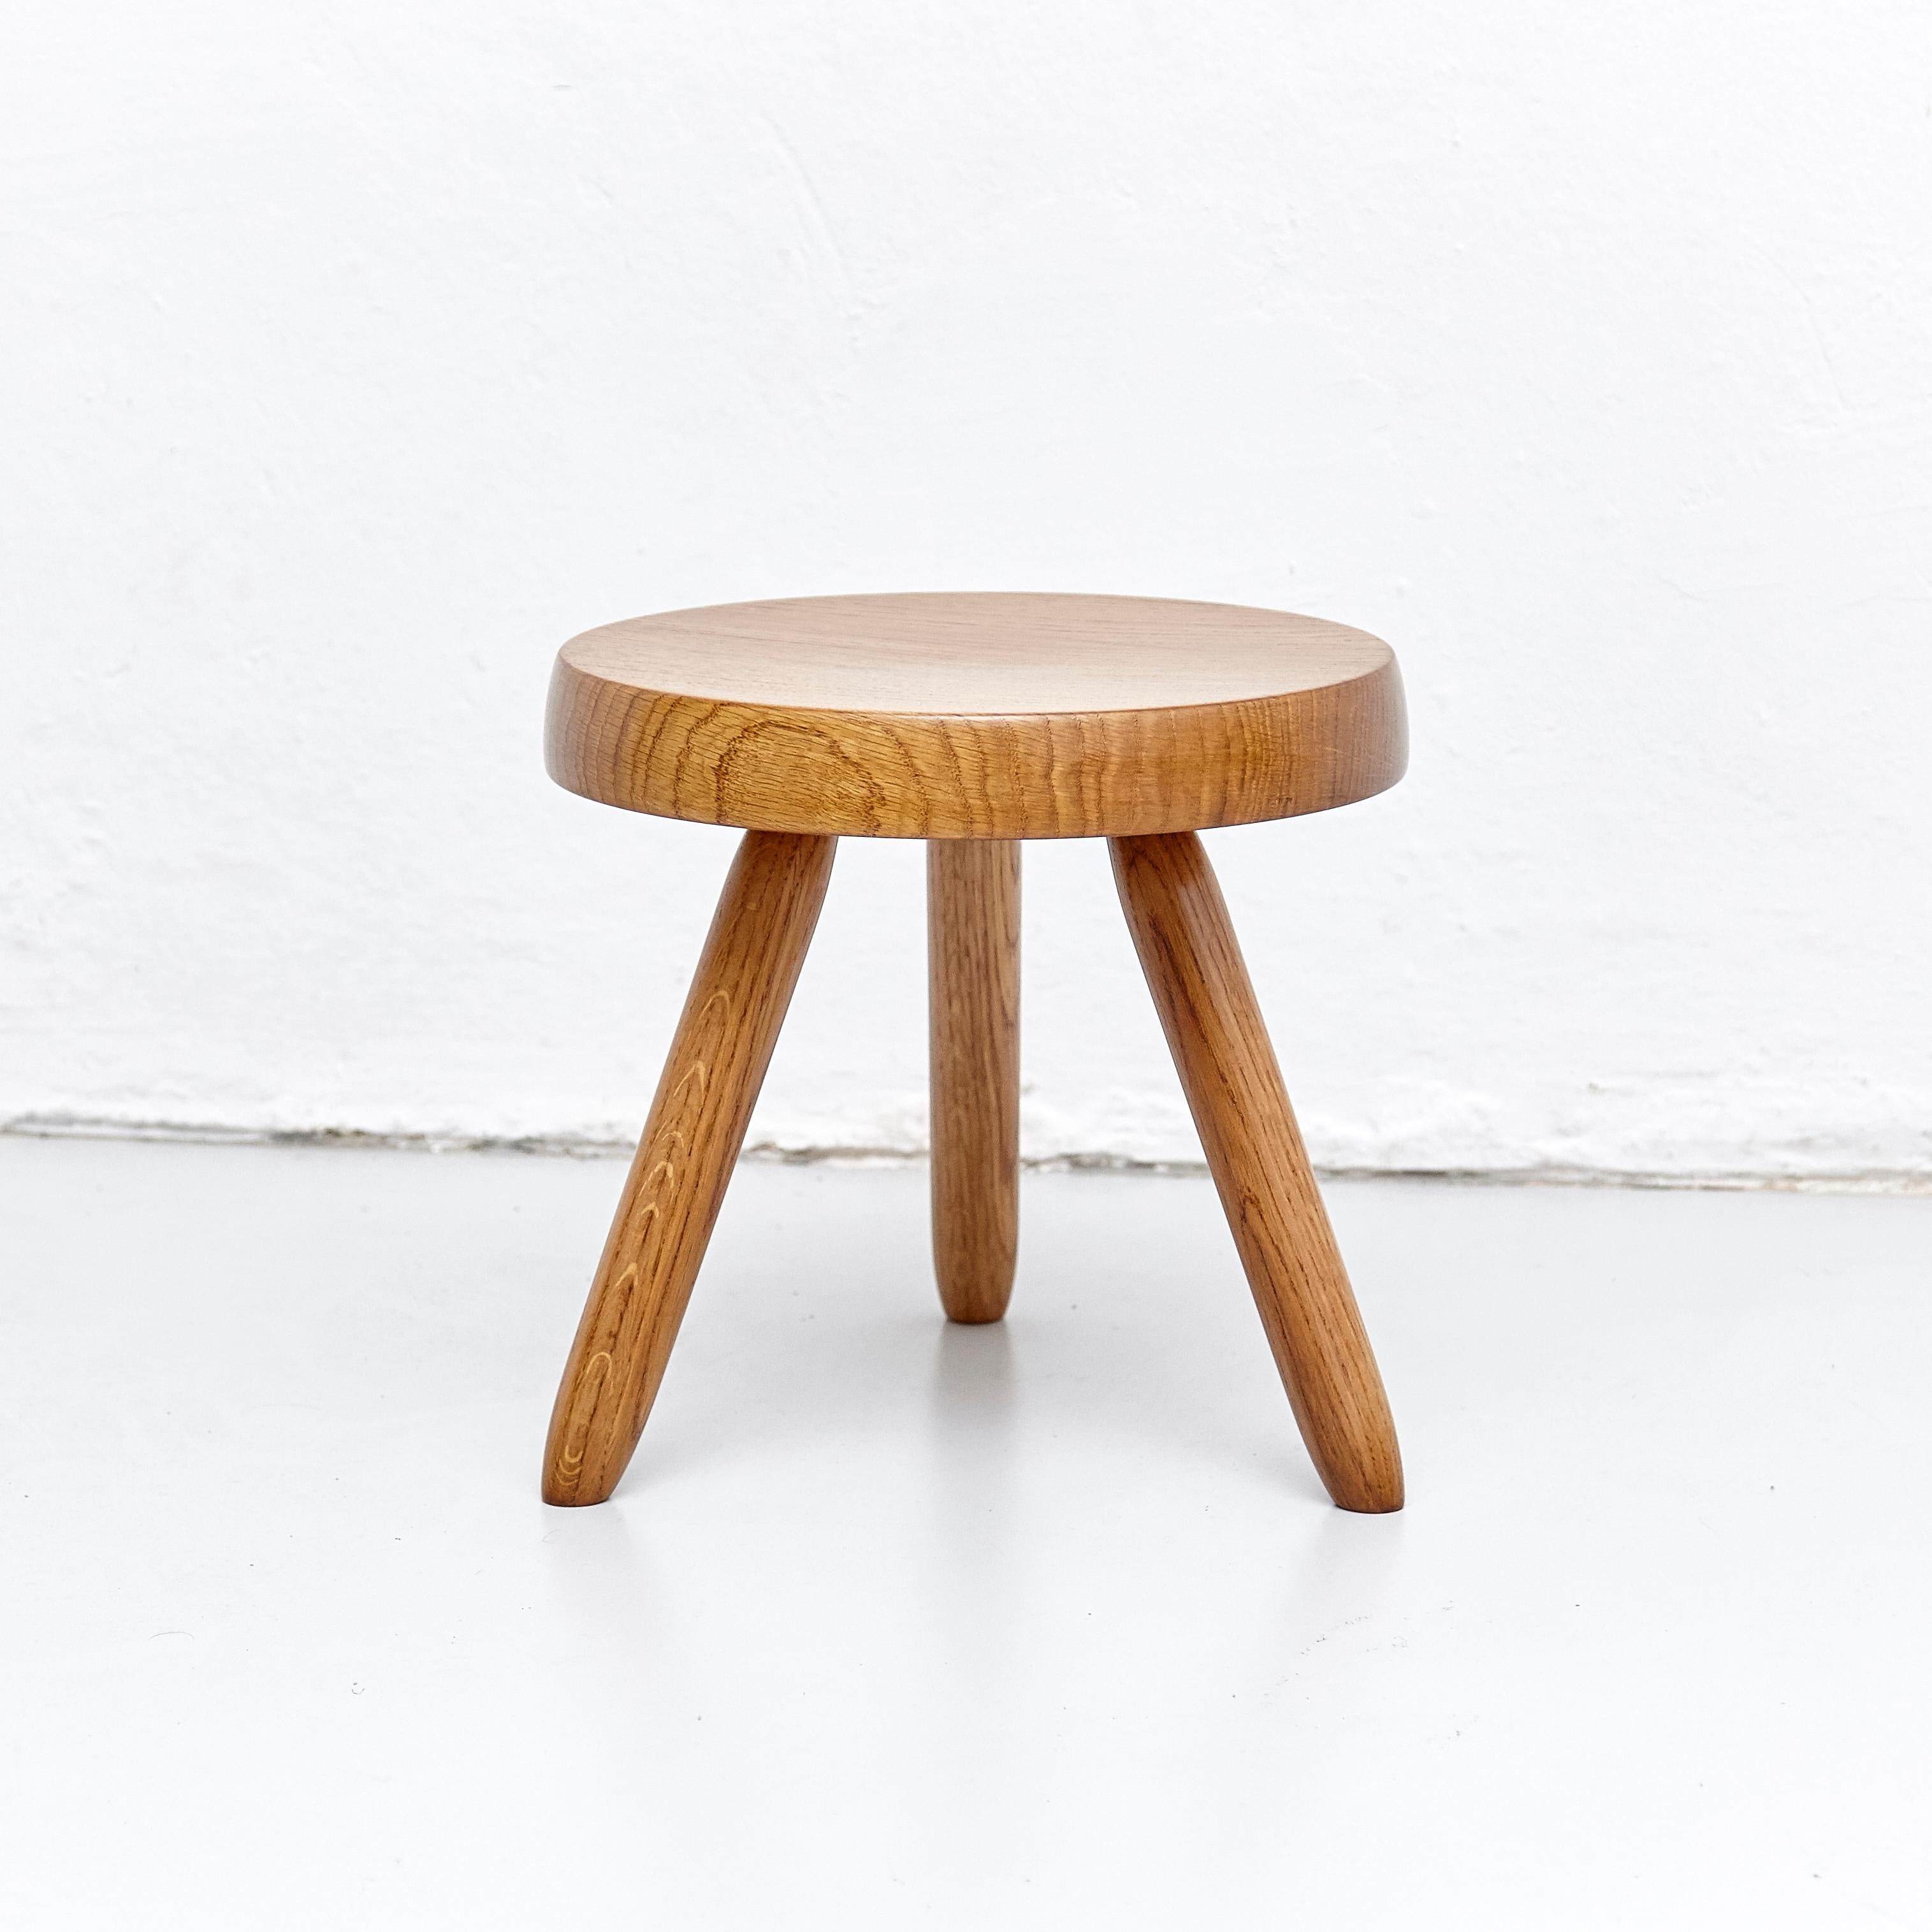 Late 20th Century After Charlotte Perriand, Mid-Century Modern Wood Stool